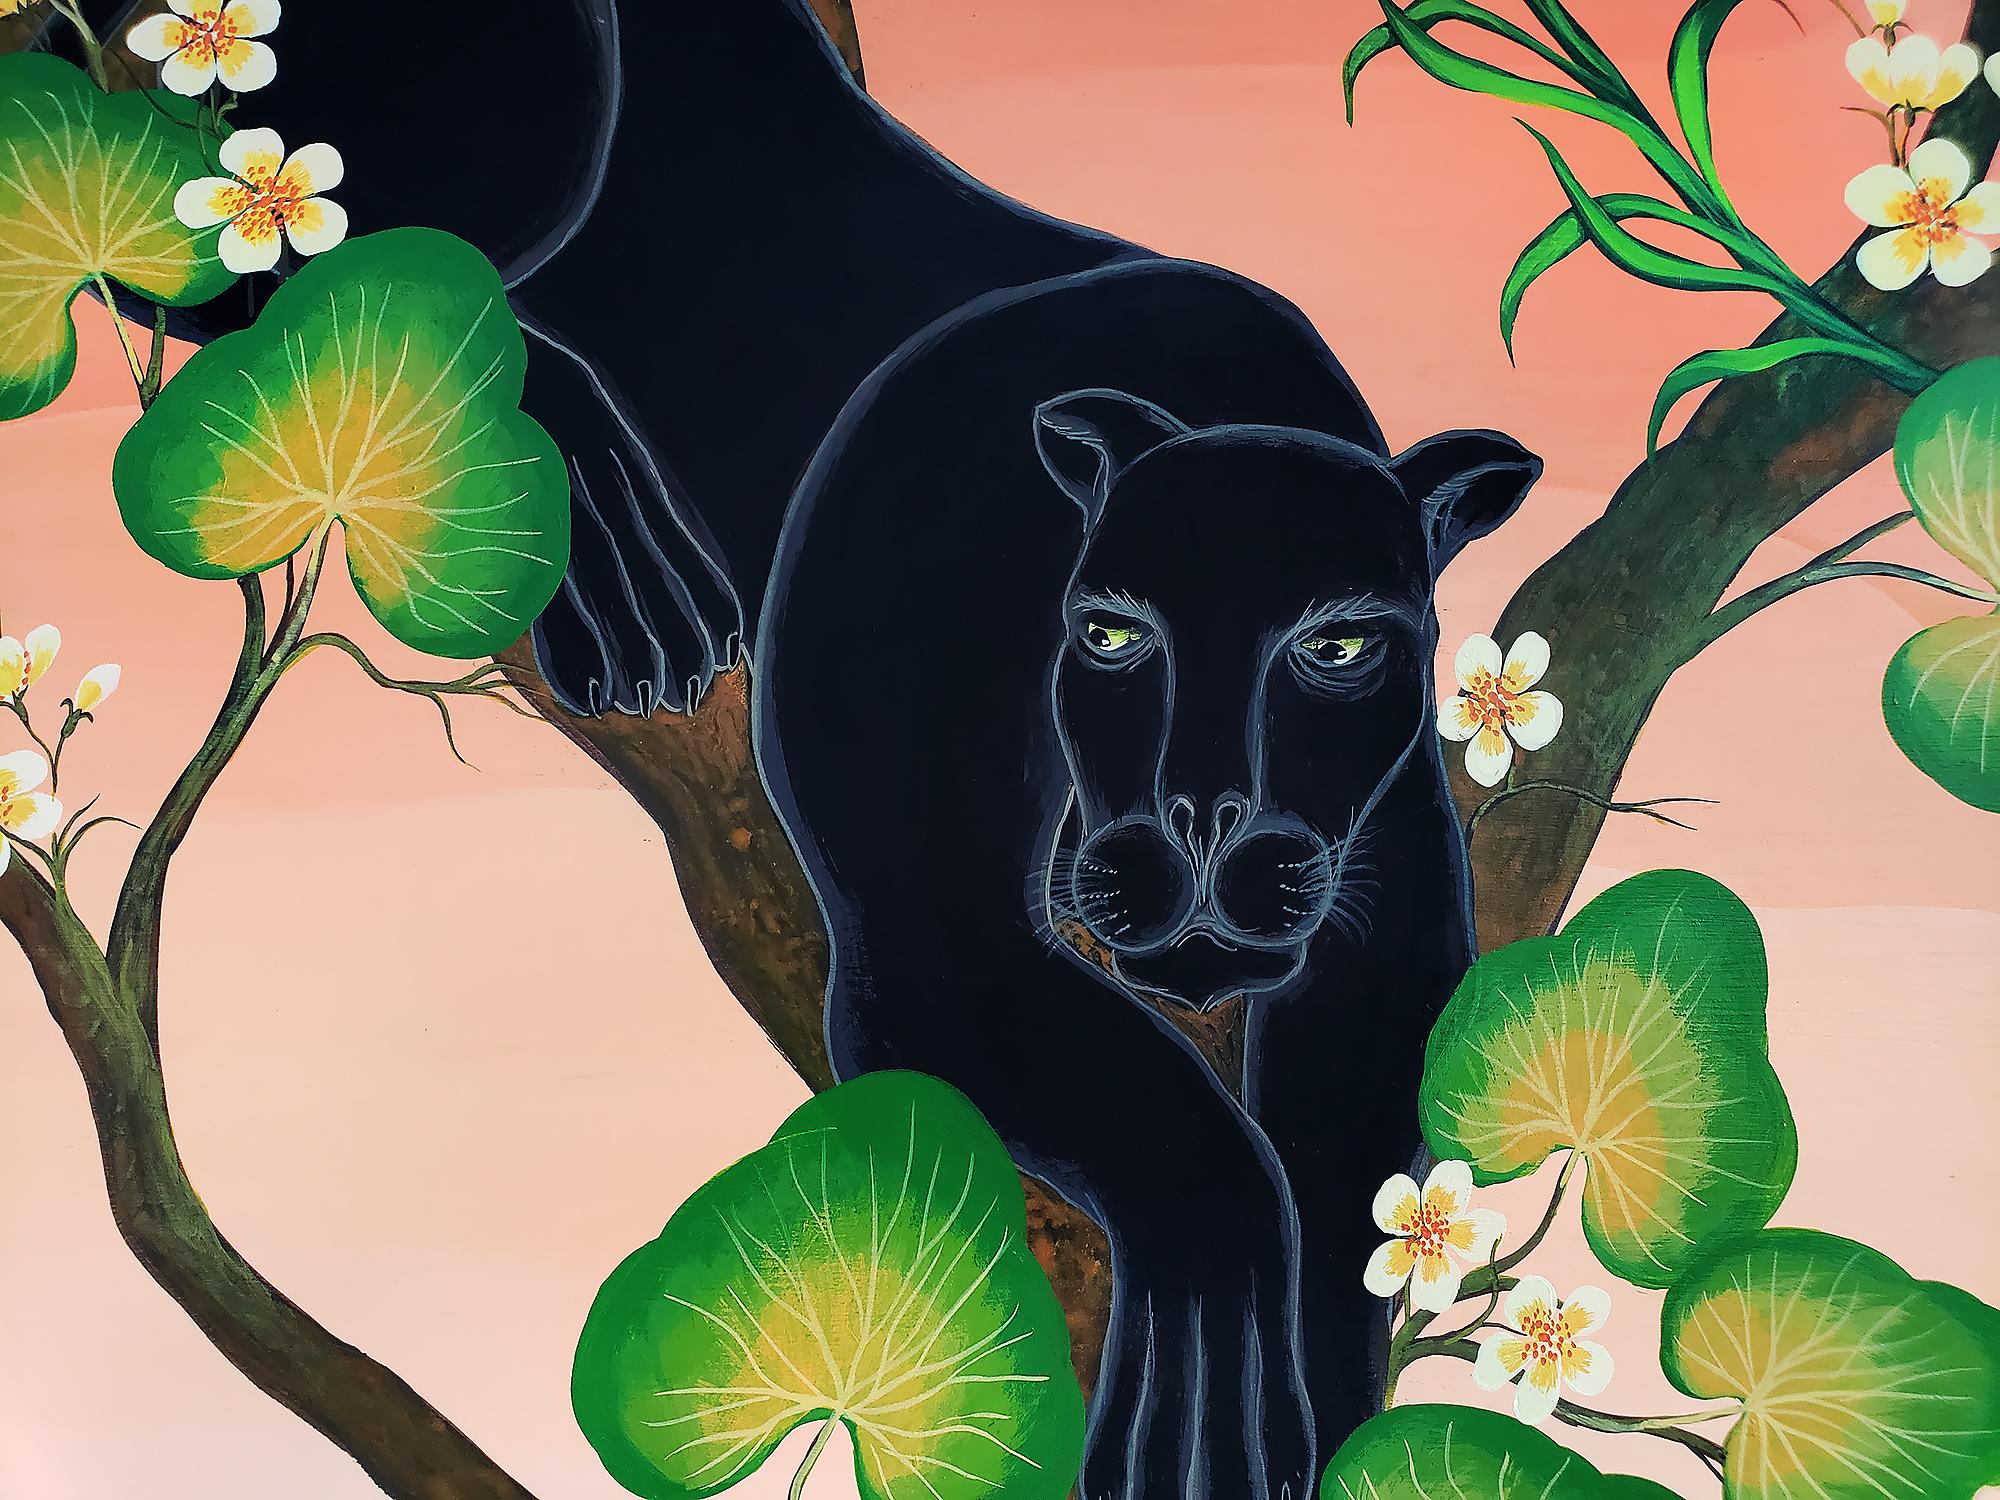 Black Panthers in a tree with a peach sky - Art Deco Painting by Gustavo Novoa